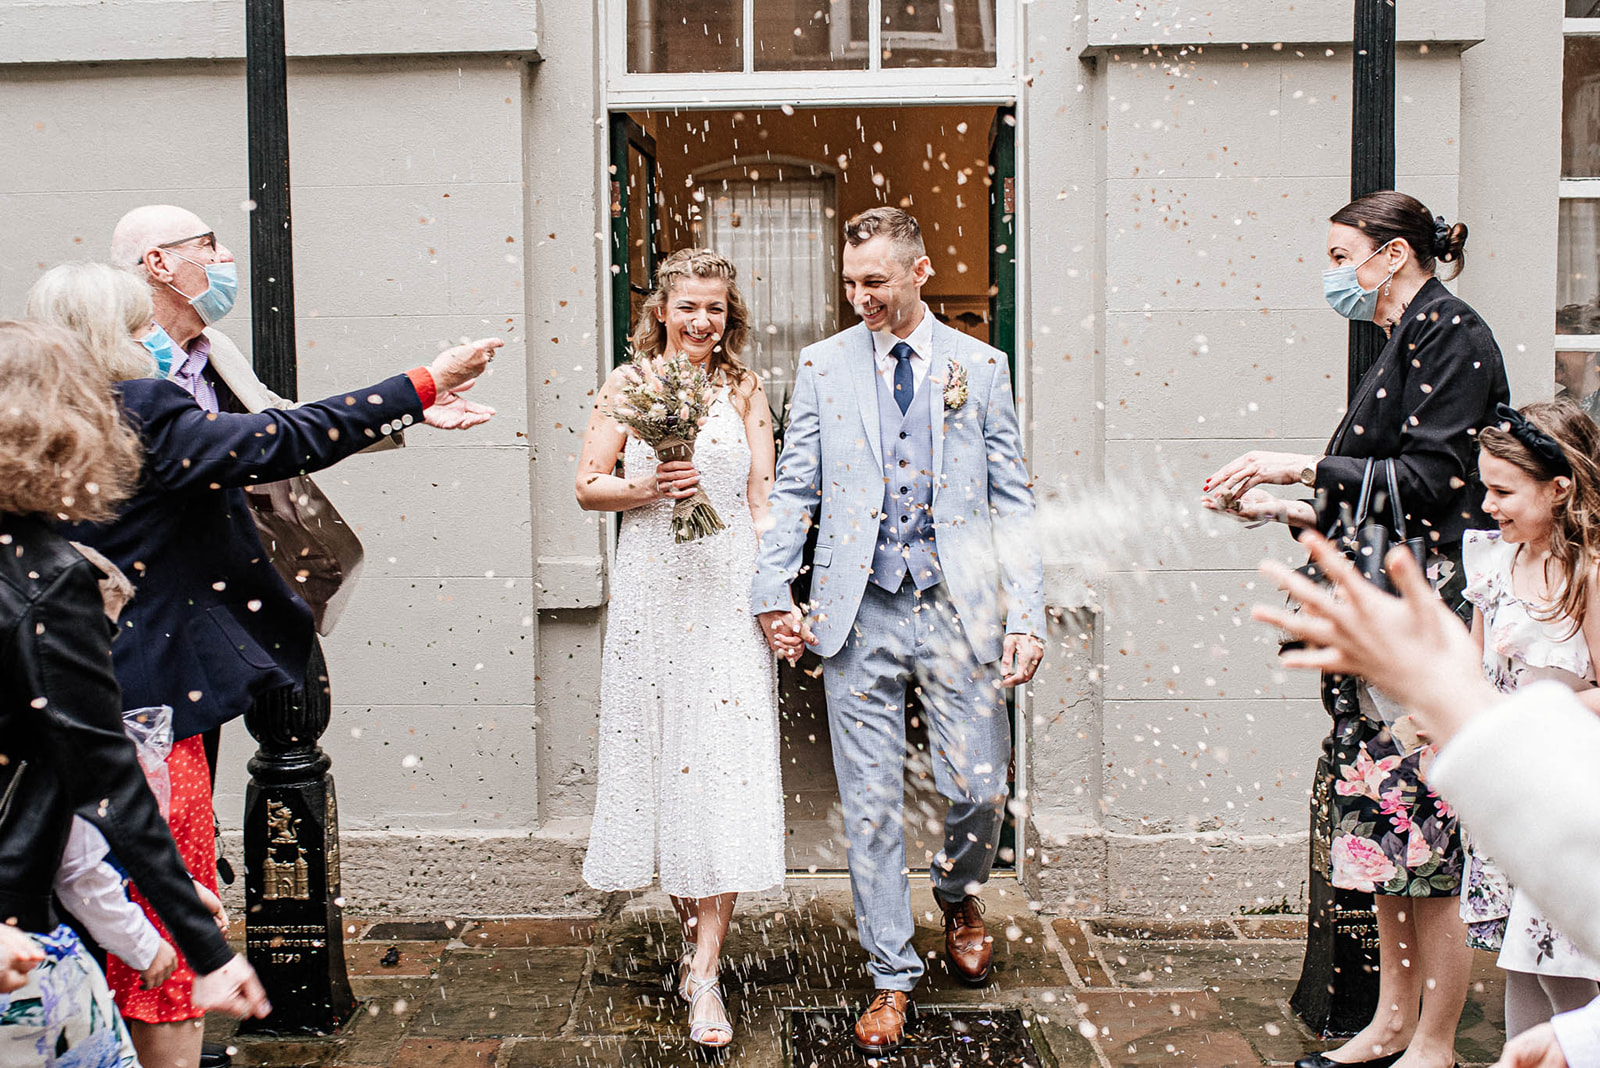 Confetti thrown at newly married bride and groom at Priory Place in Doncaster